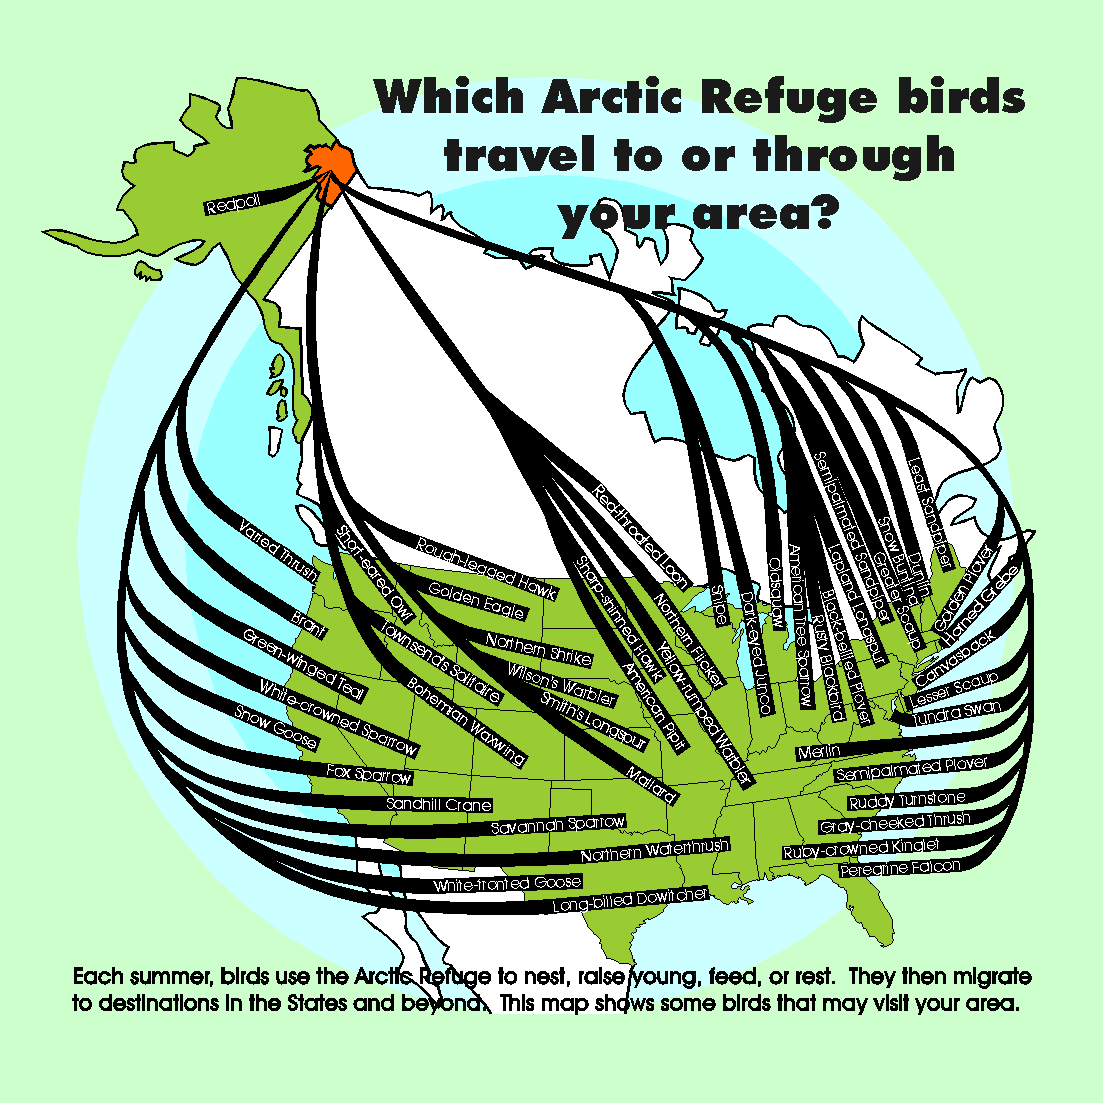 poster of birds from Refuge to each State